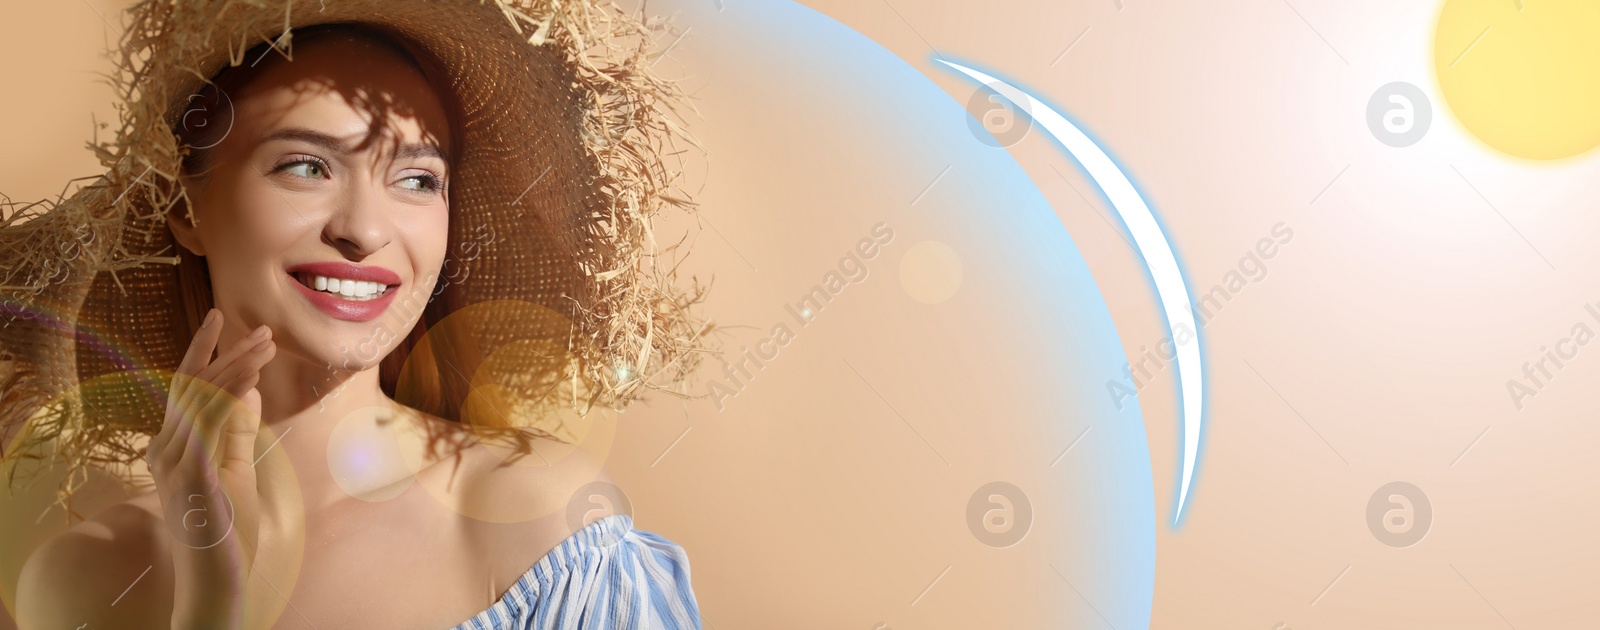 Image of Sun protection product (sunscreen) as barrier against ultraviolet, banner design. Beautiful young woman in straw hat on beige background